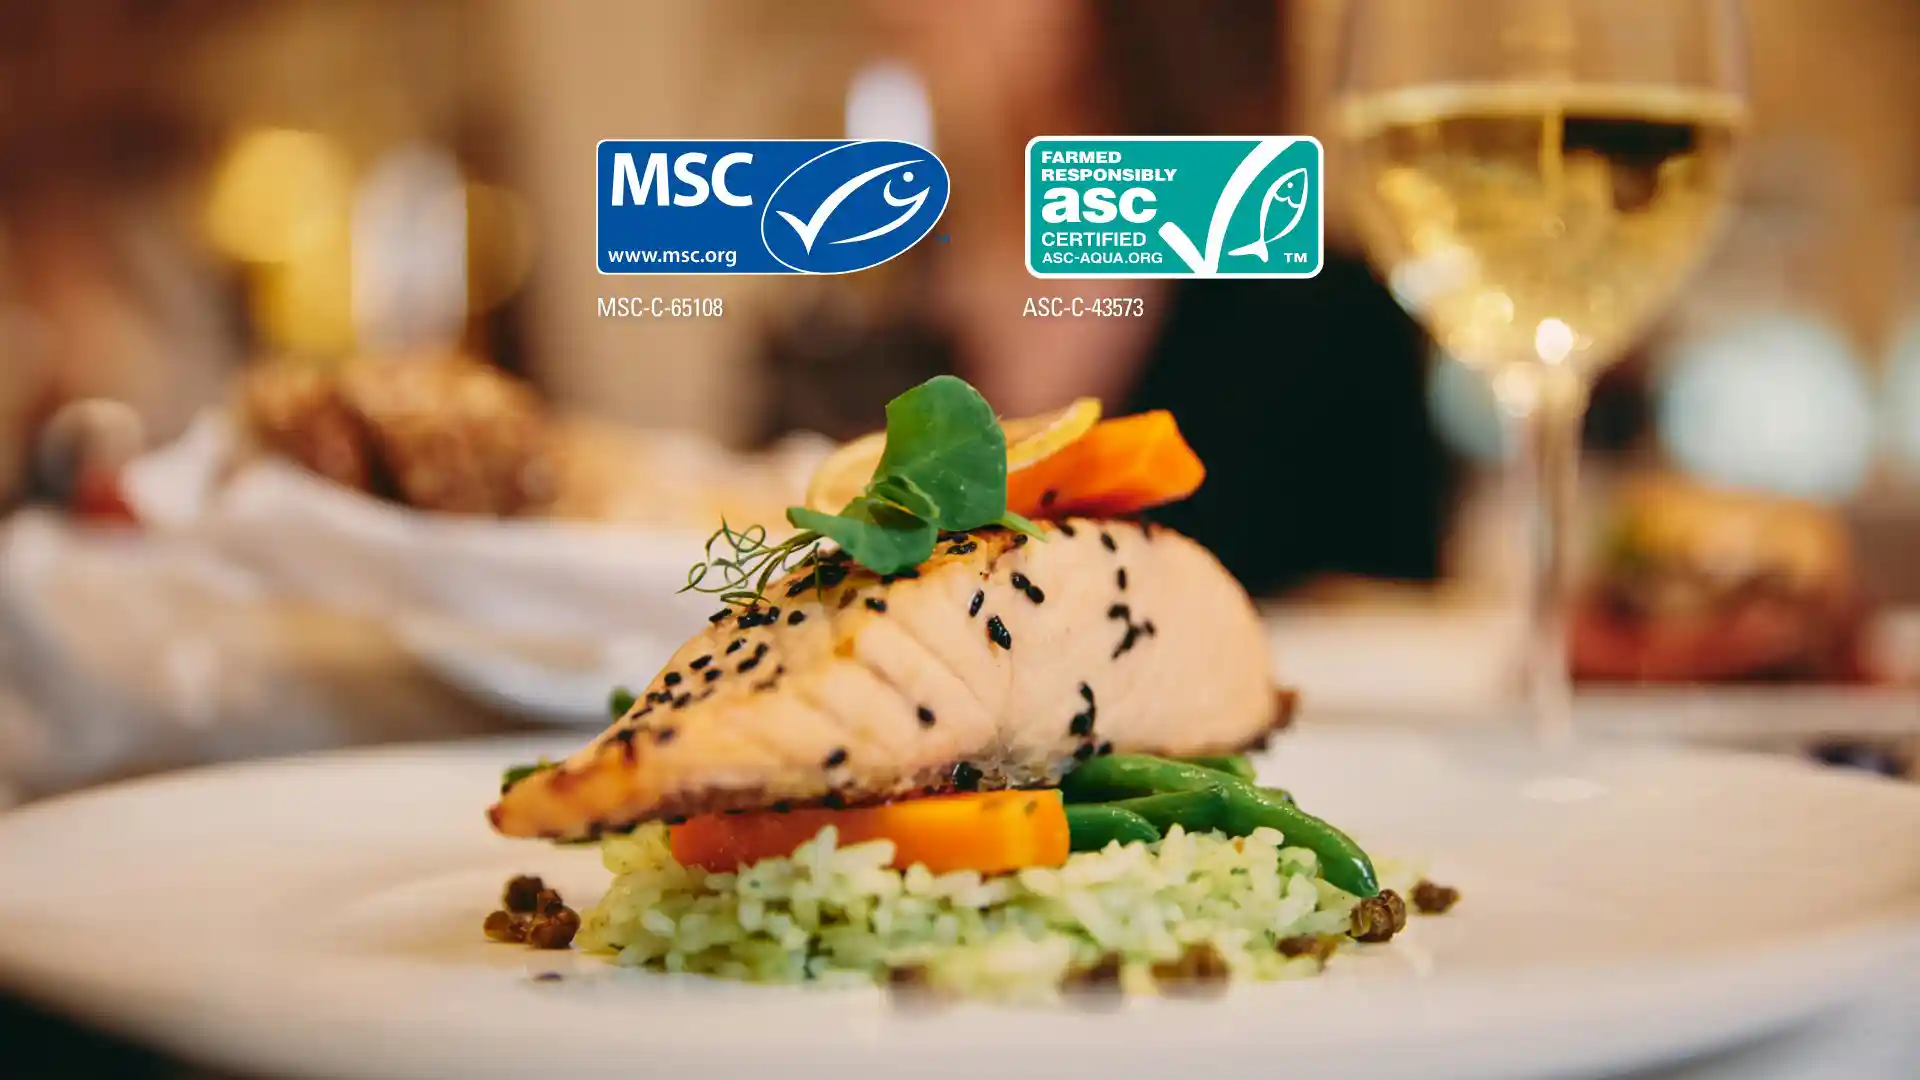 New Certifications Expand Our Global Fresh Fish Program